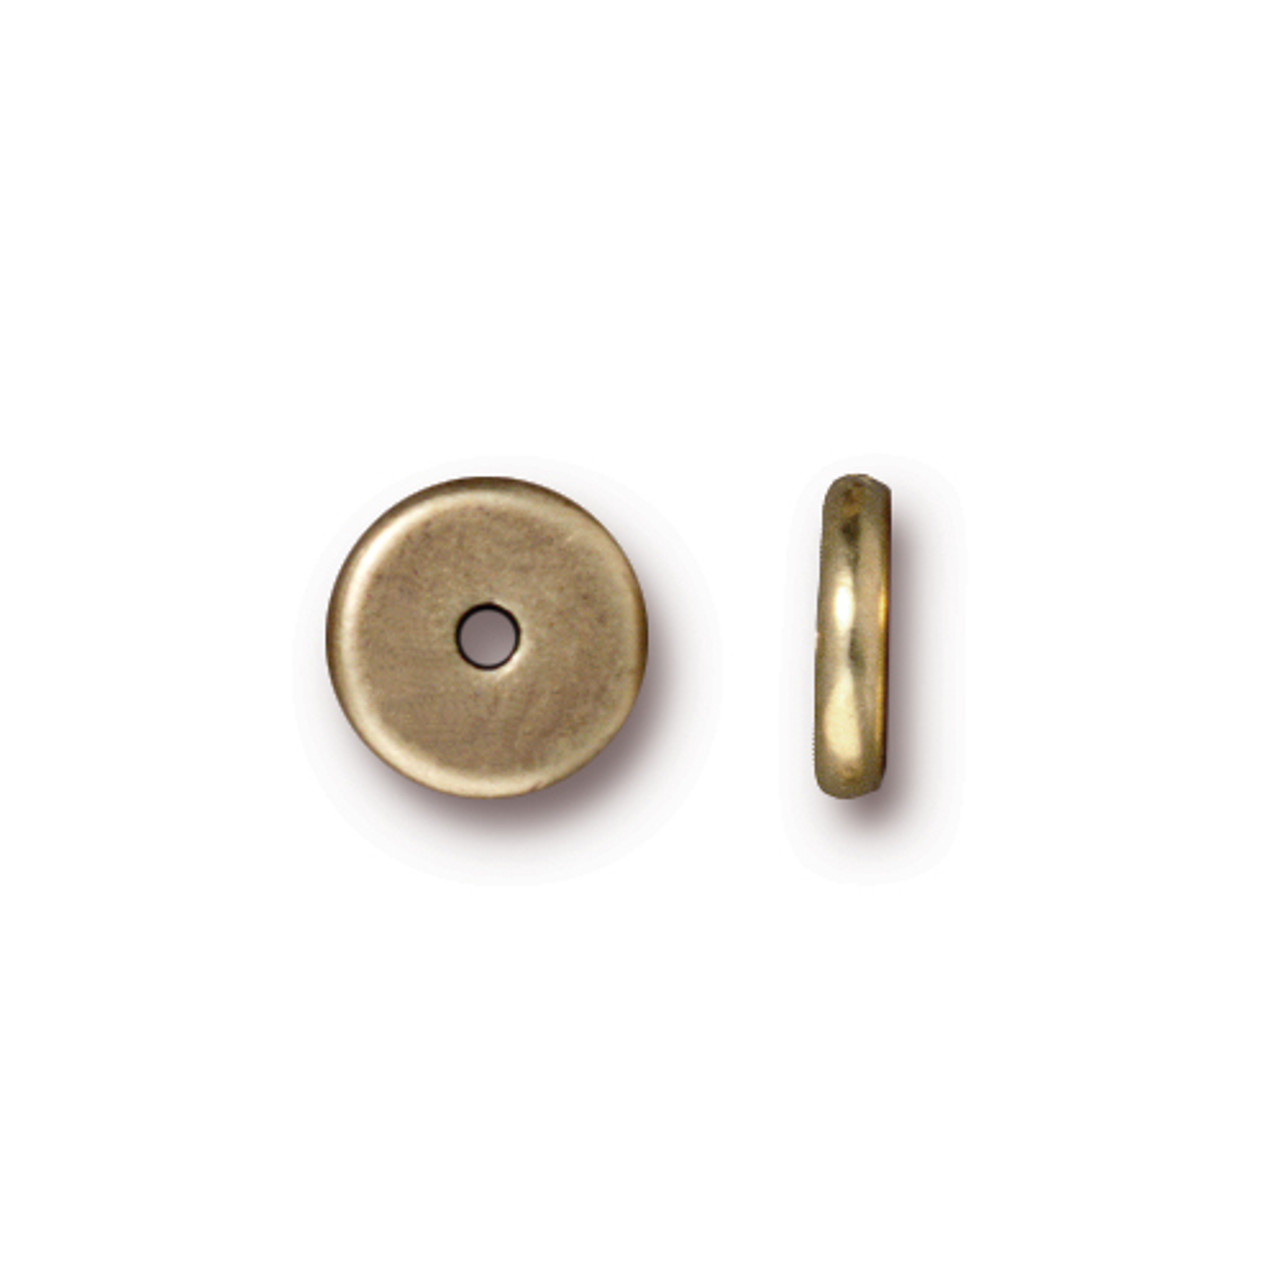 Disk 8mm Spacer Bead, Oxidized Brass Plate, 100 per Pack